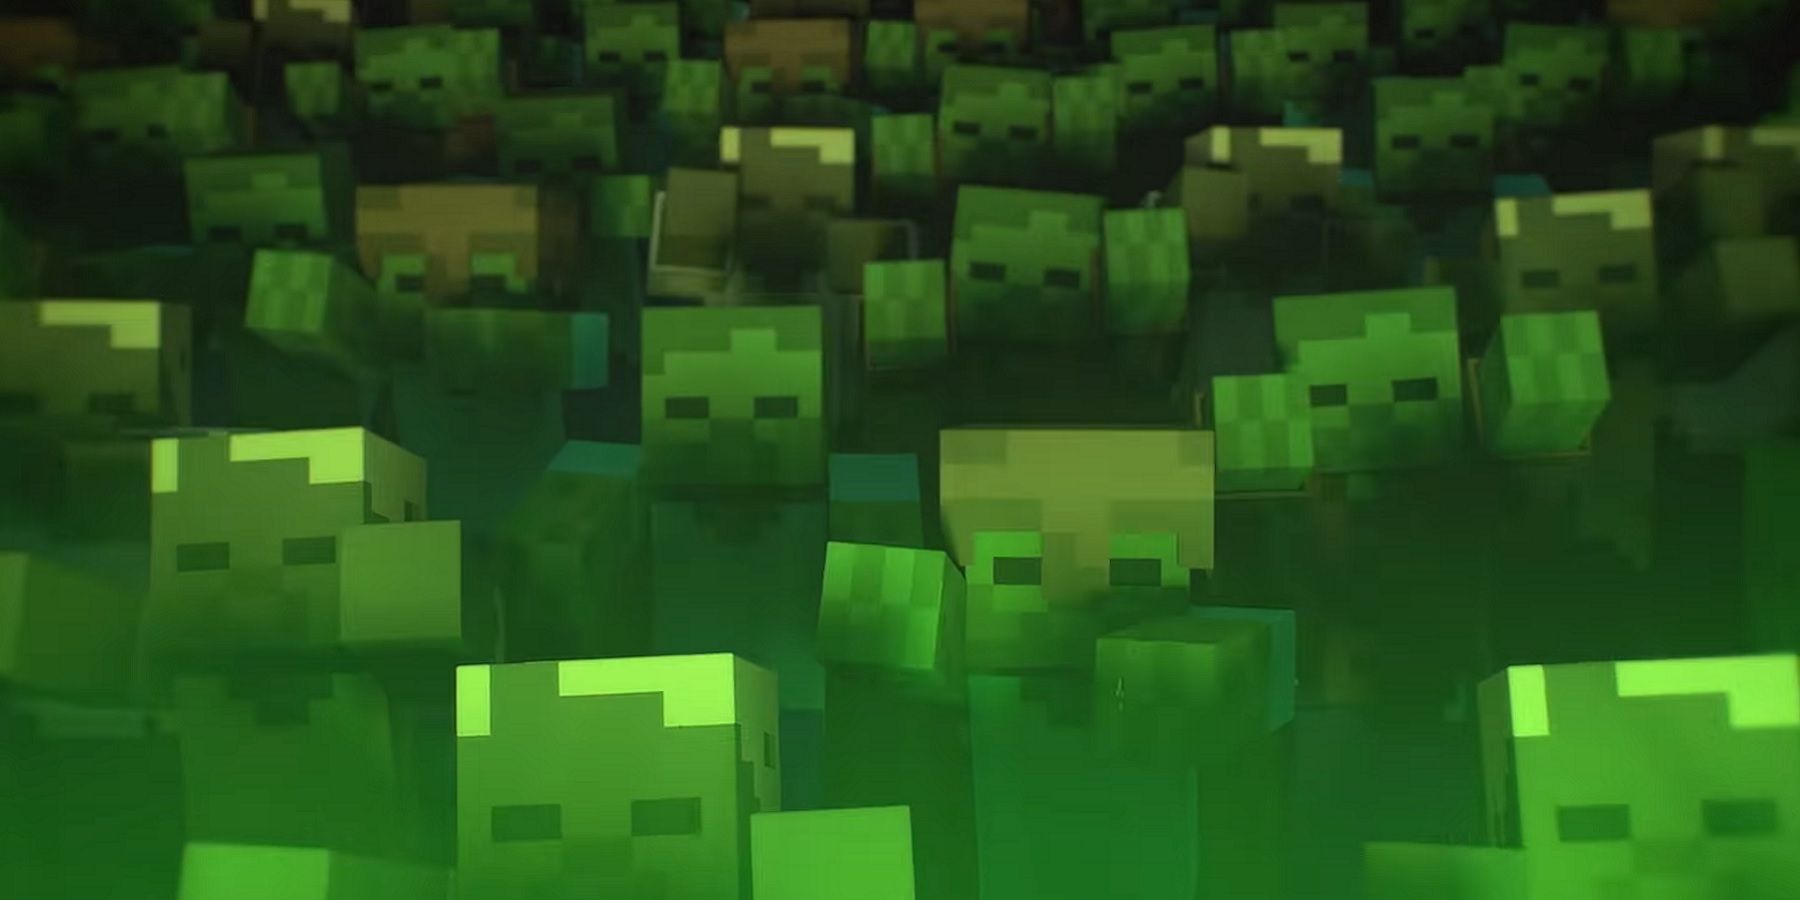 An inage showing some Minecraft zombies in a crowd.